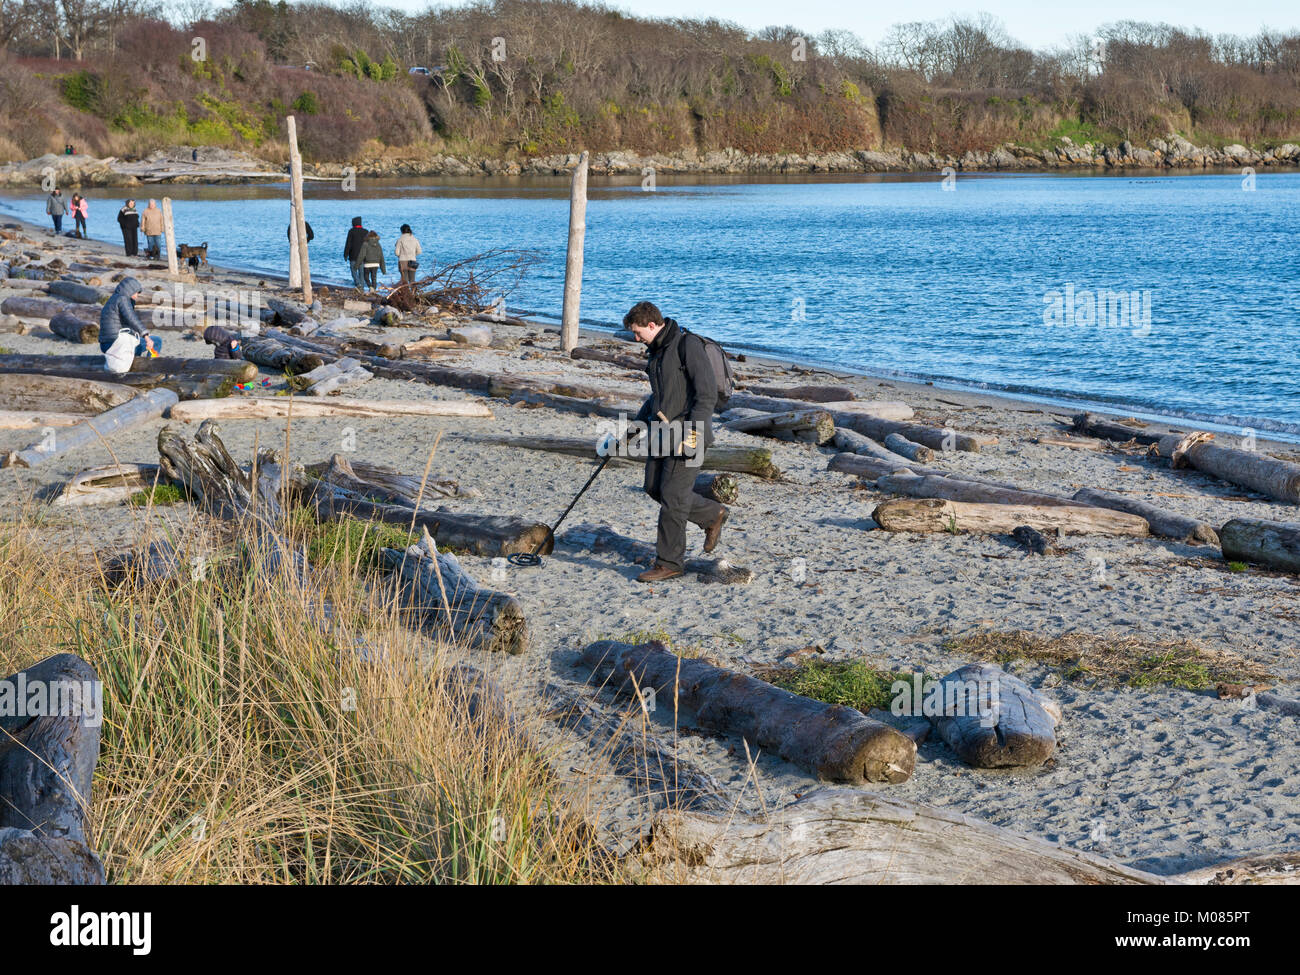 Man with metal detector at one of the beaches in Greater Victoria, BC, Canada. Stock Photo